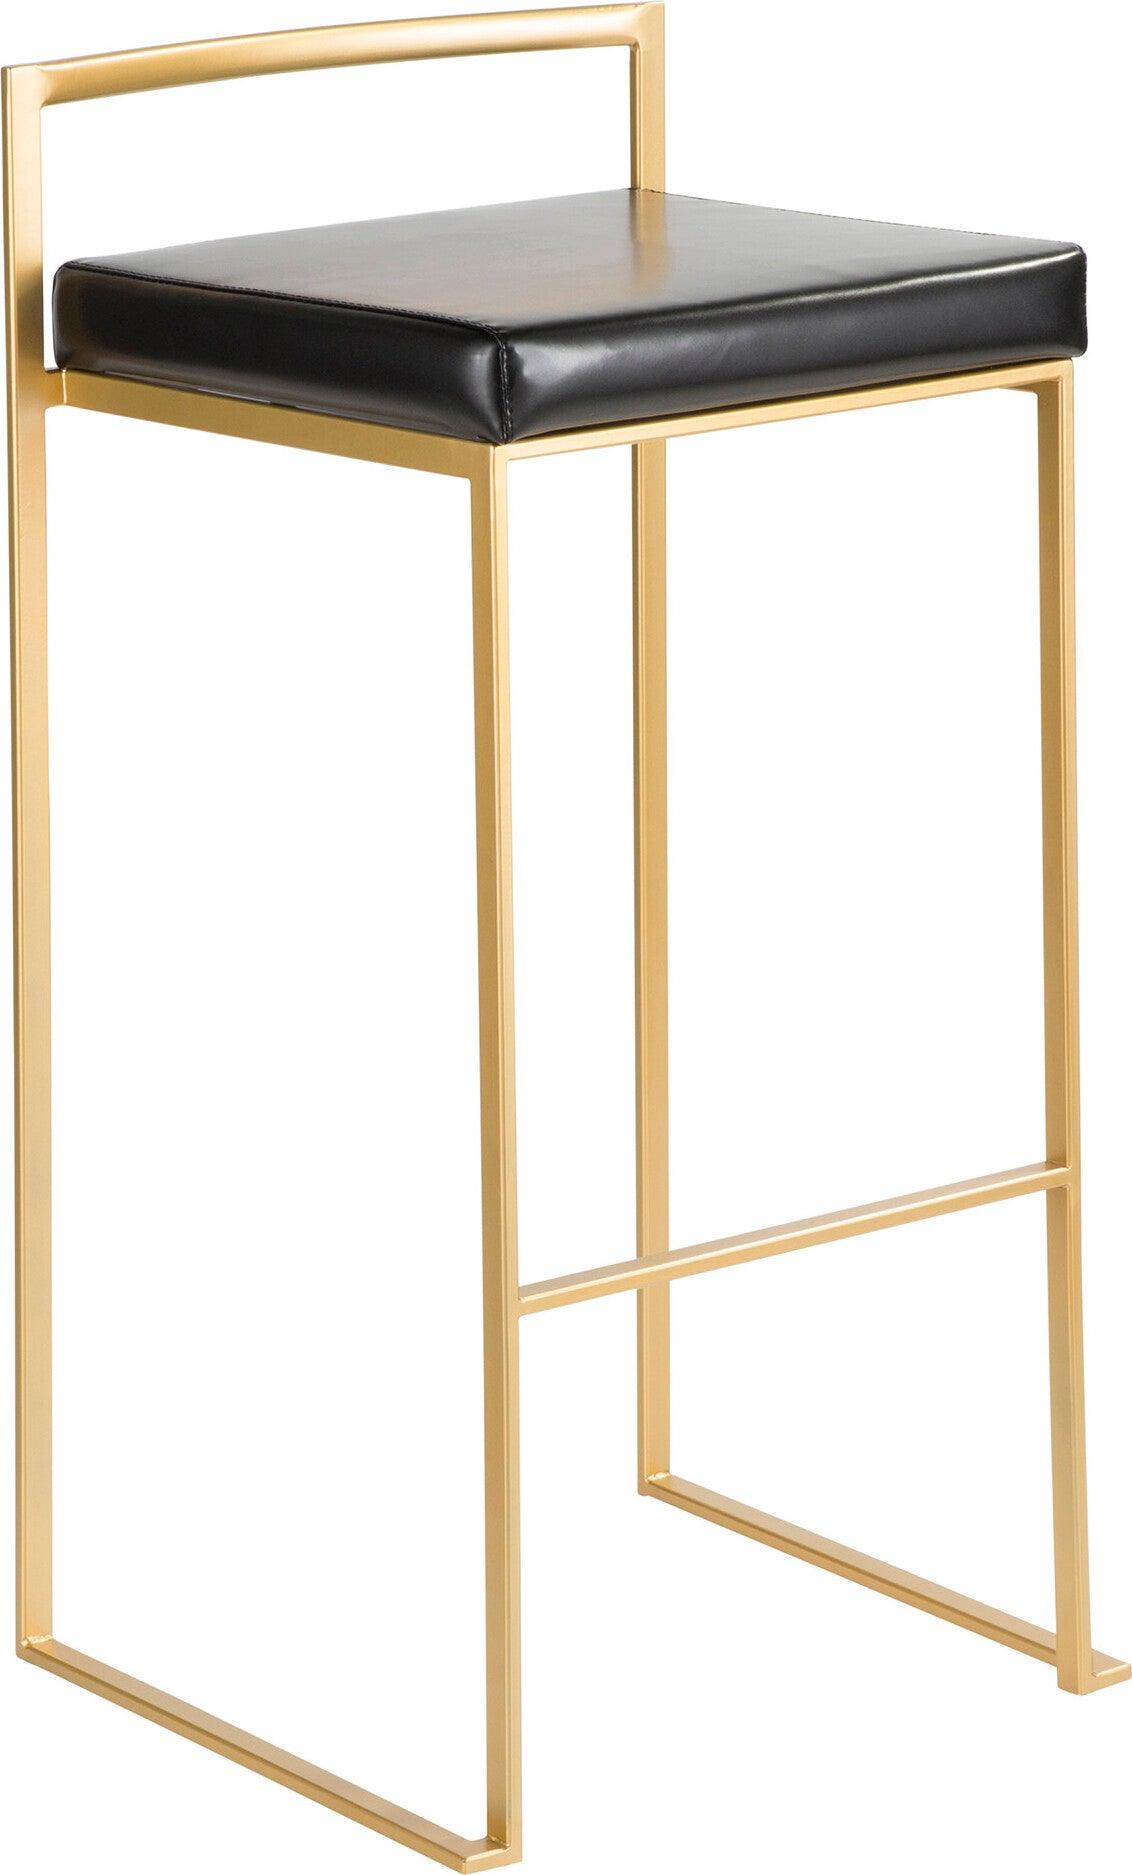 Lumisource Barstools - Fuji Contemporary-Glam Barstool in Gold with Black Faux Leather (Set of 2)